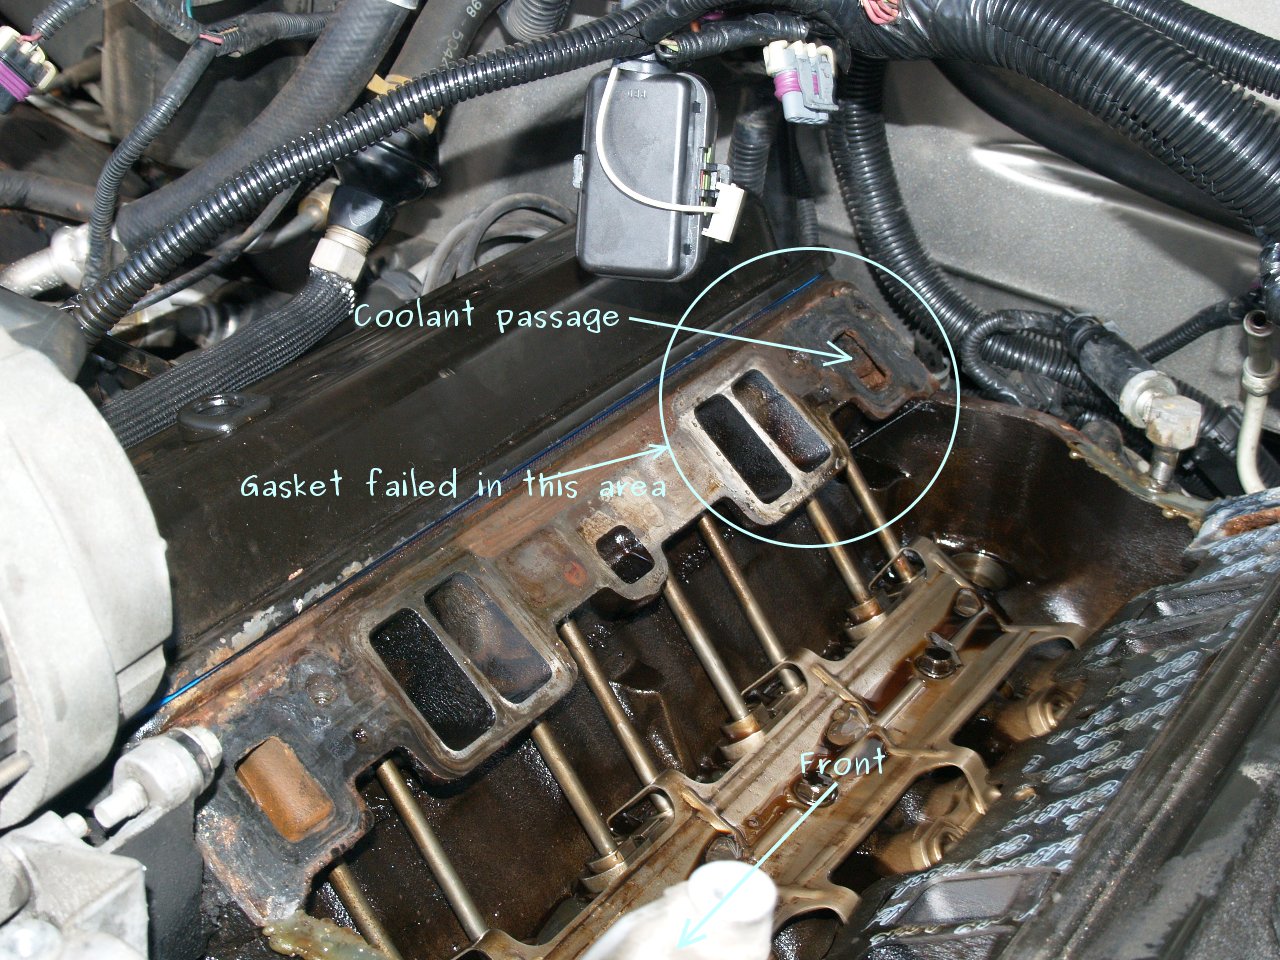 See P1307 in engine